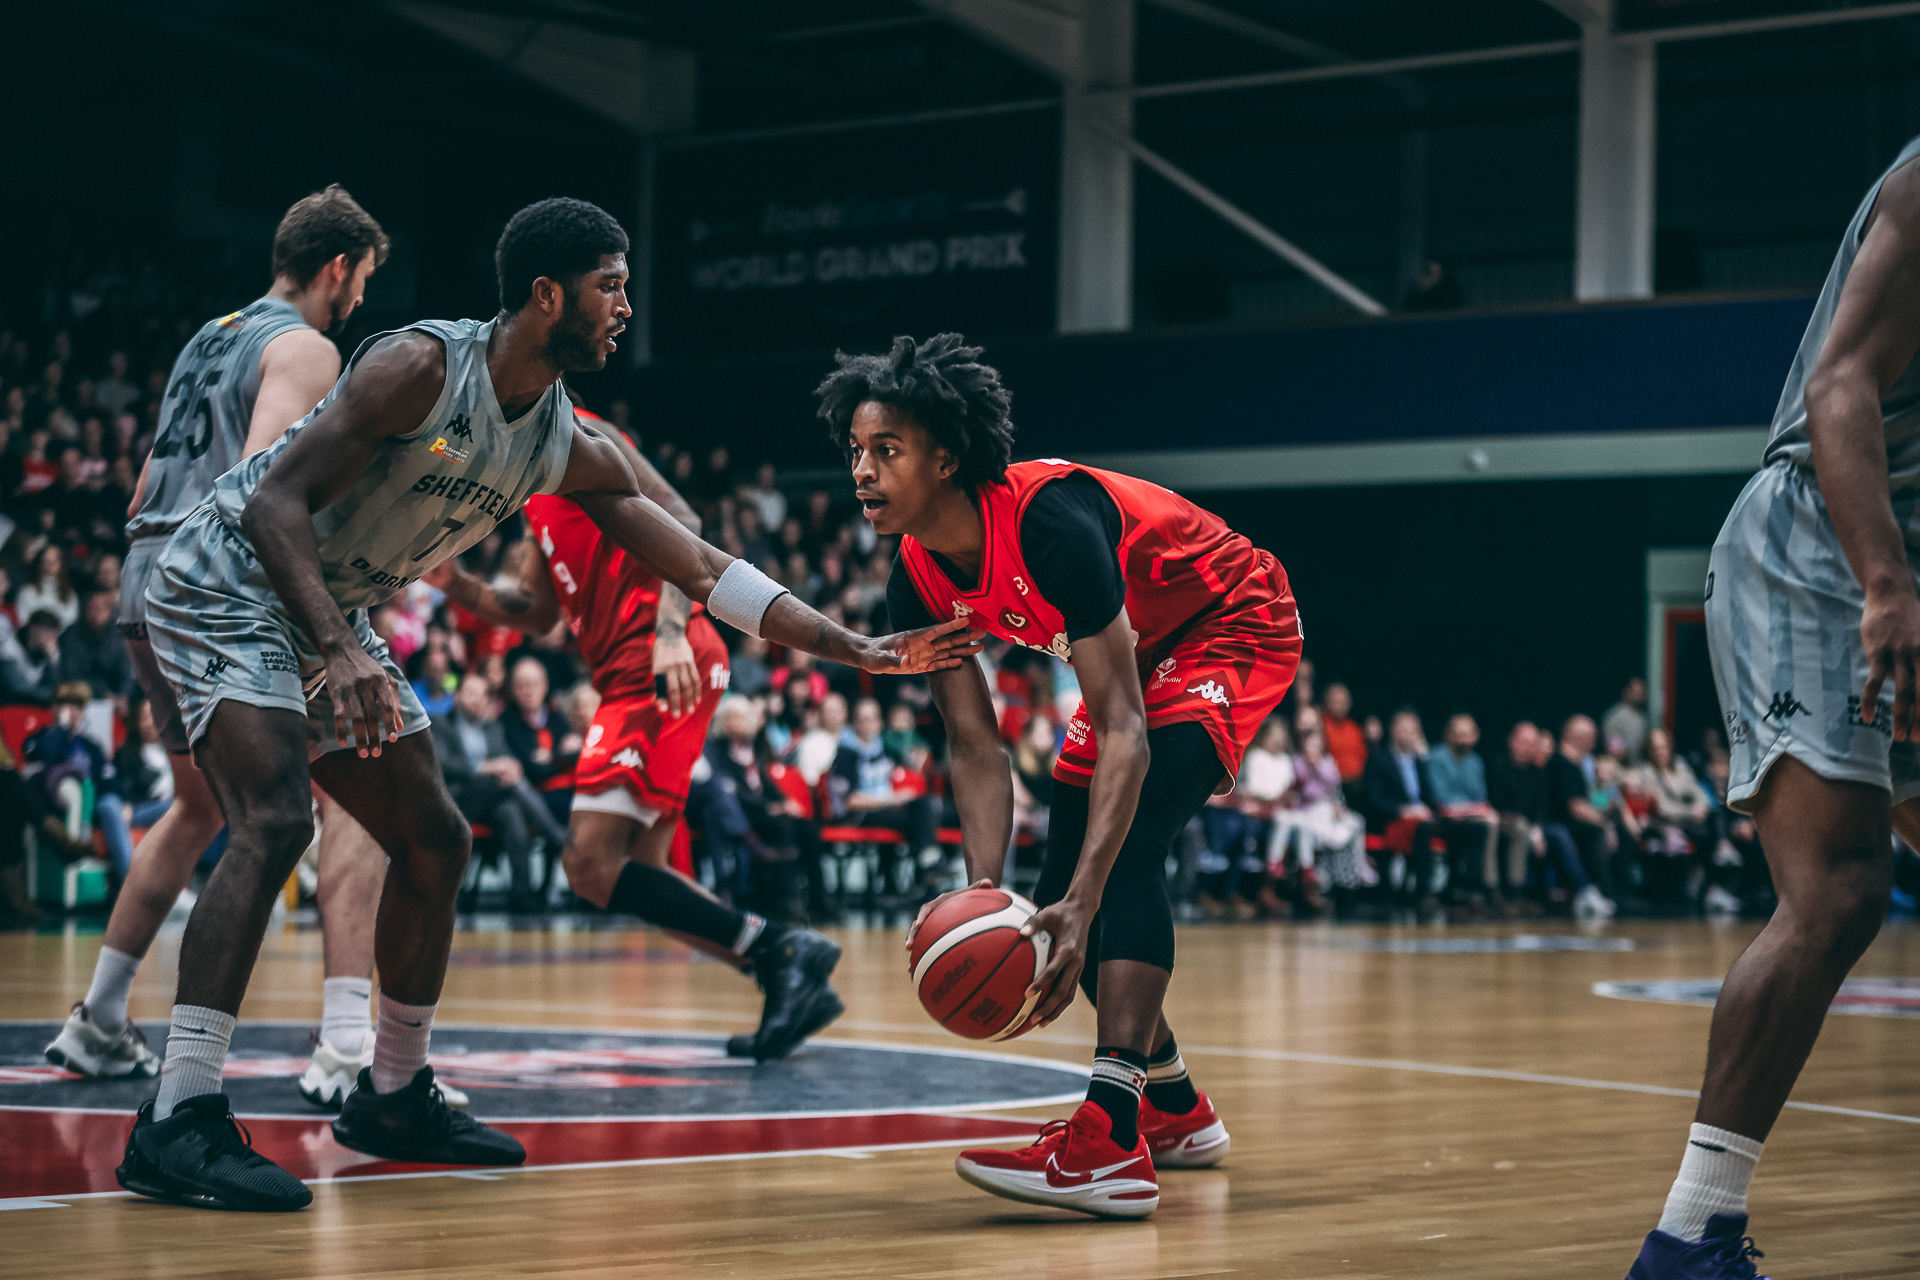 Miryne Thomas named to British Basketball League Team of the Week